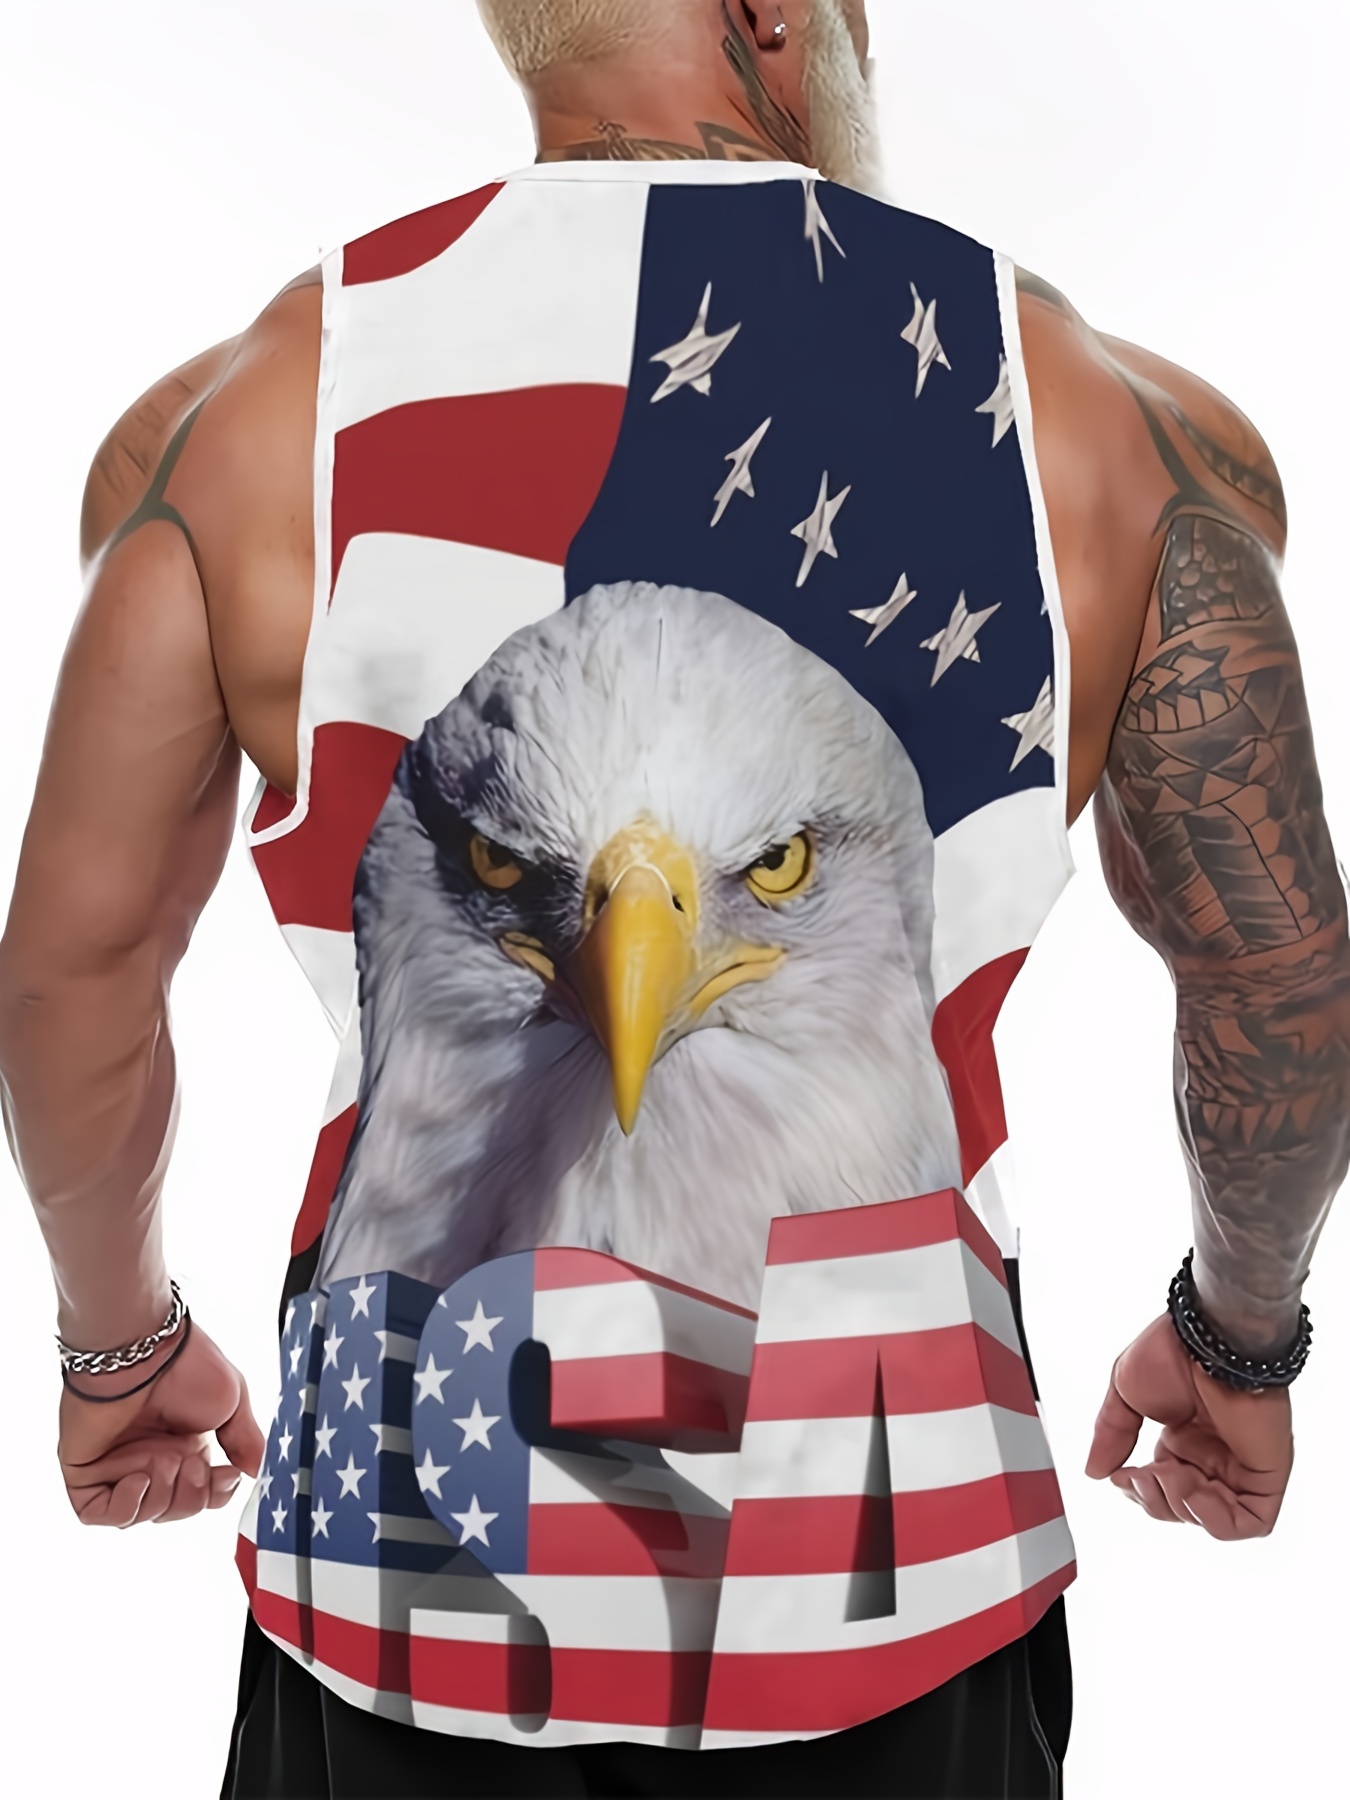 Bald Eagle US Flag Print A-Shirt Tanks, Sleeveless Tank Top, Lightweight  Active Undershirts, For Workout At The Gym, Bodybuilding, And Fitness, As  Gif